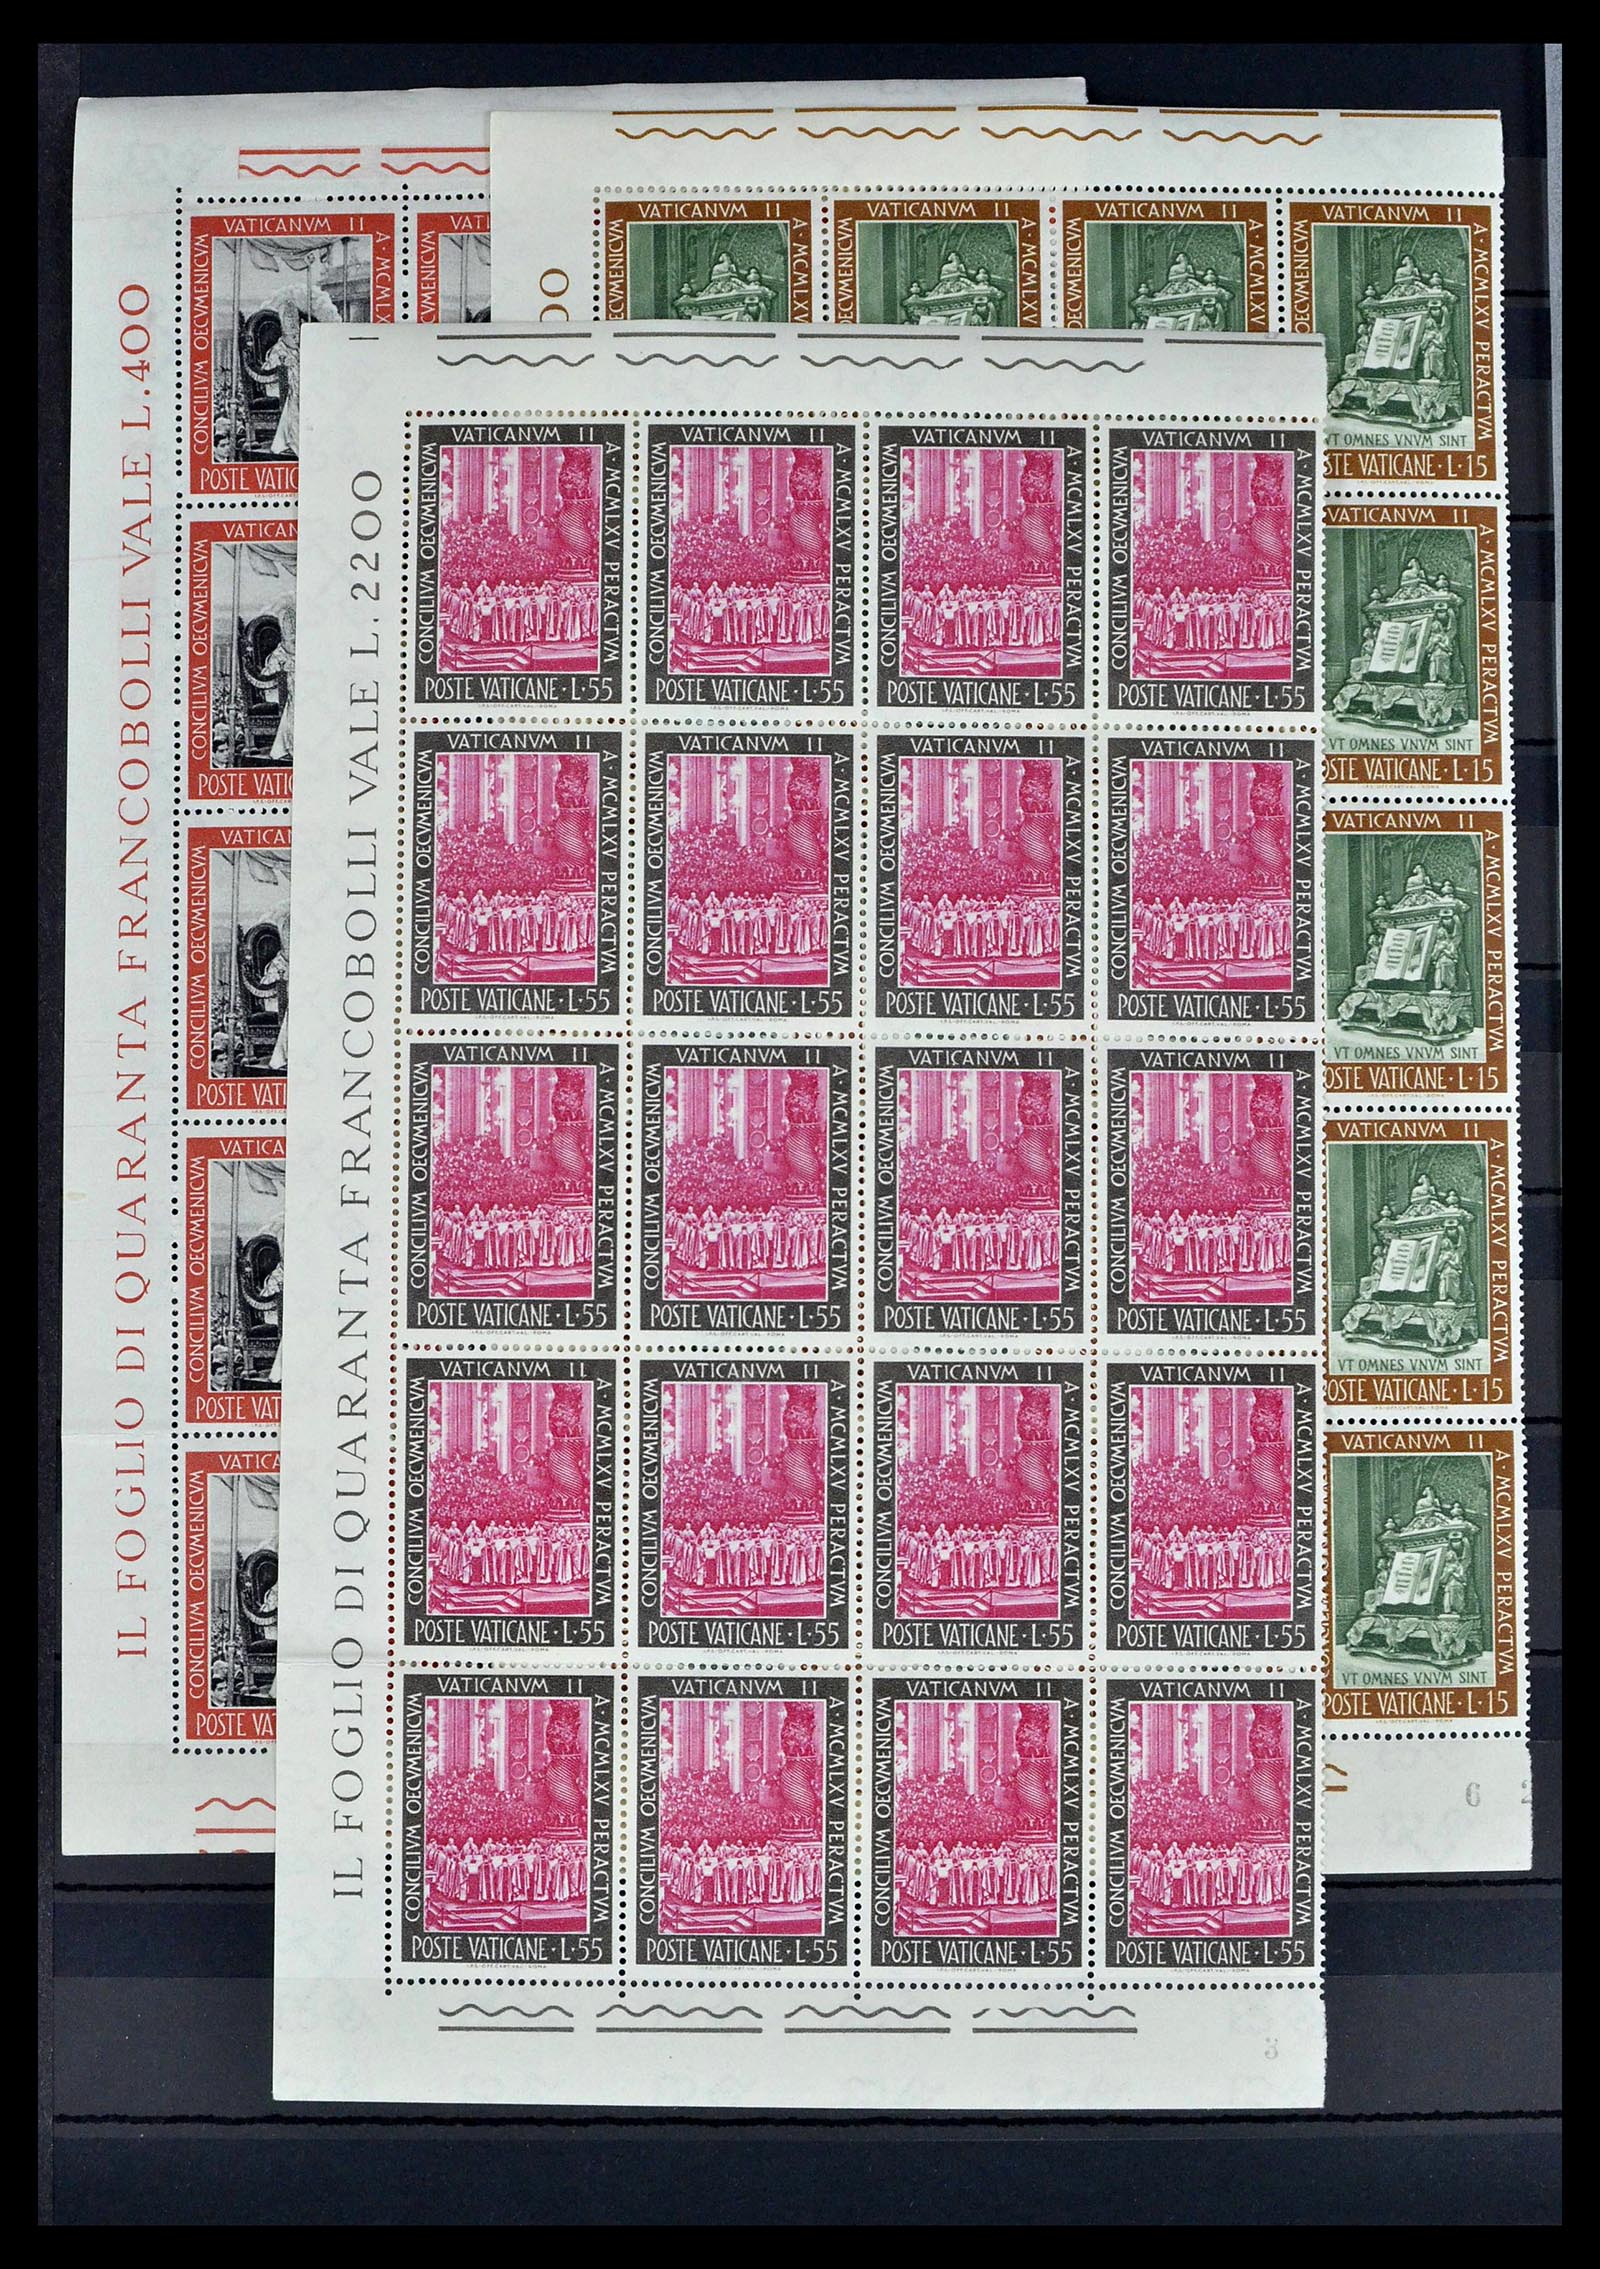 39236 0024 - Stamp collection 39236 European countries 40s-60s.